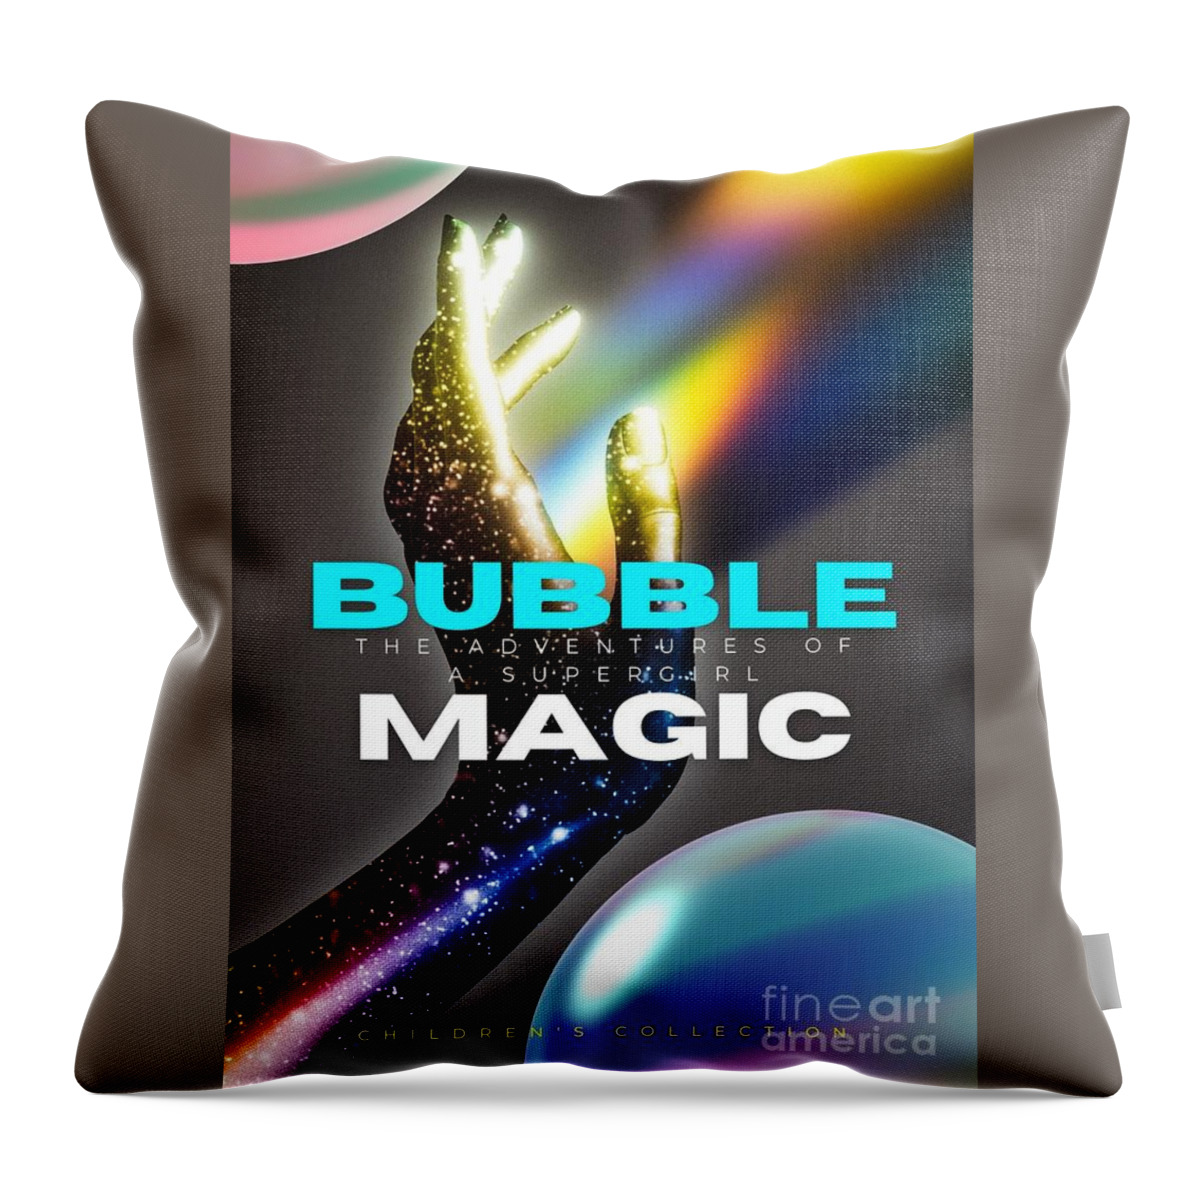 Children's Series Throw Pillow featuring the digital art Bubble Magic by Ee Photography